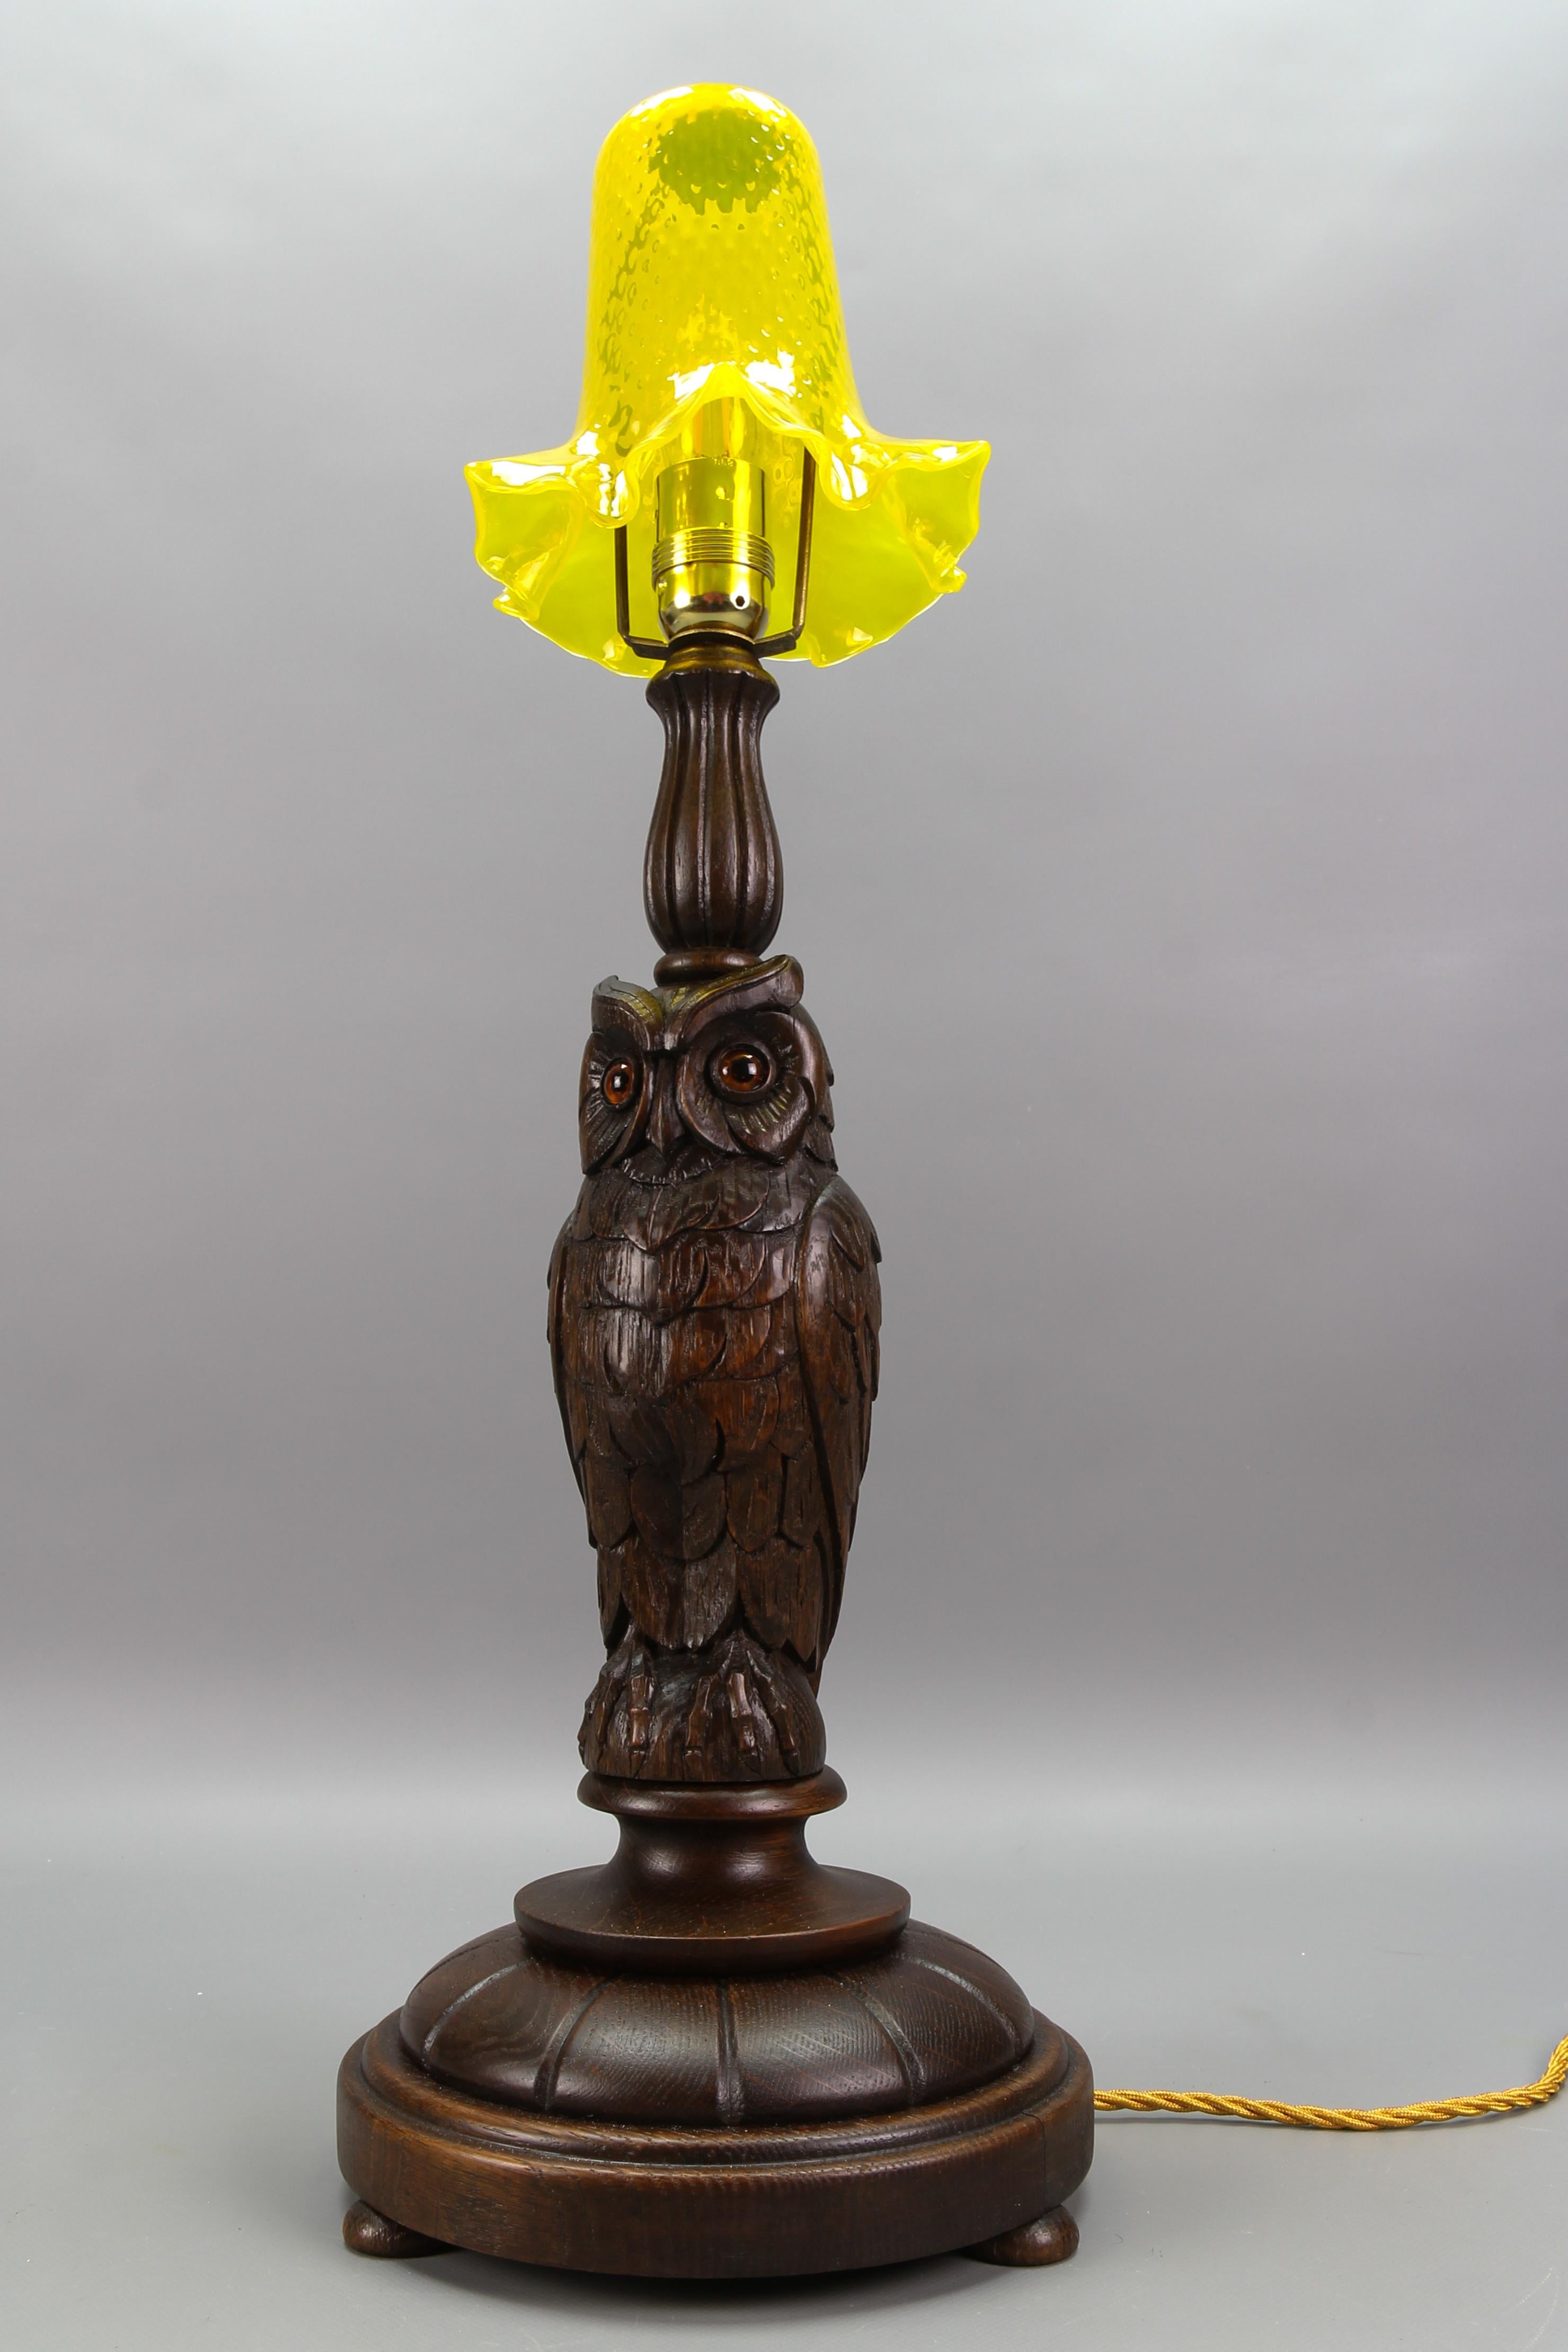 Art Deco Table Lamp with Owl Sculpture and Yellow Glass Lampshade, ca. 1920 For Sale 5